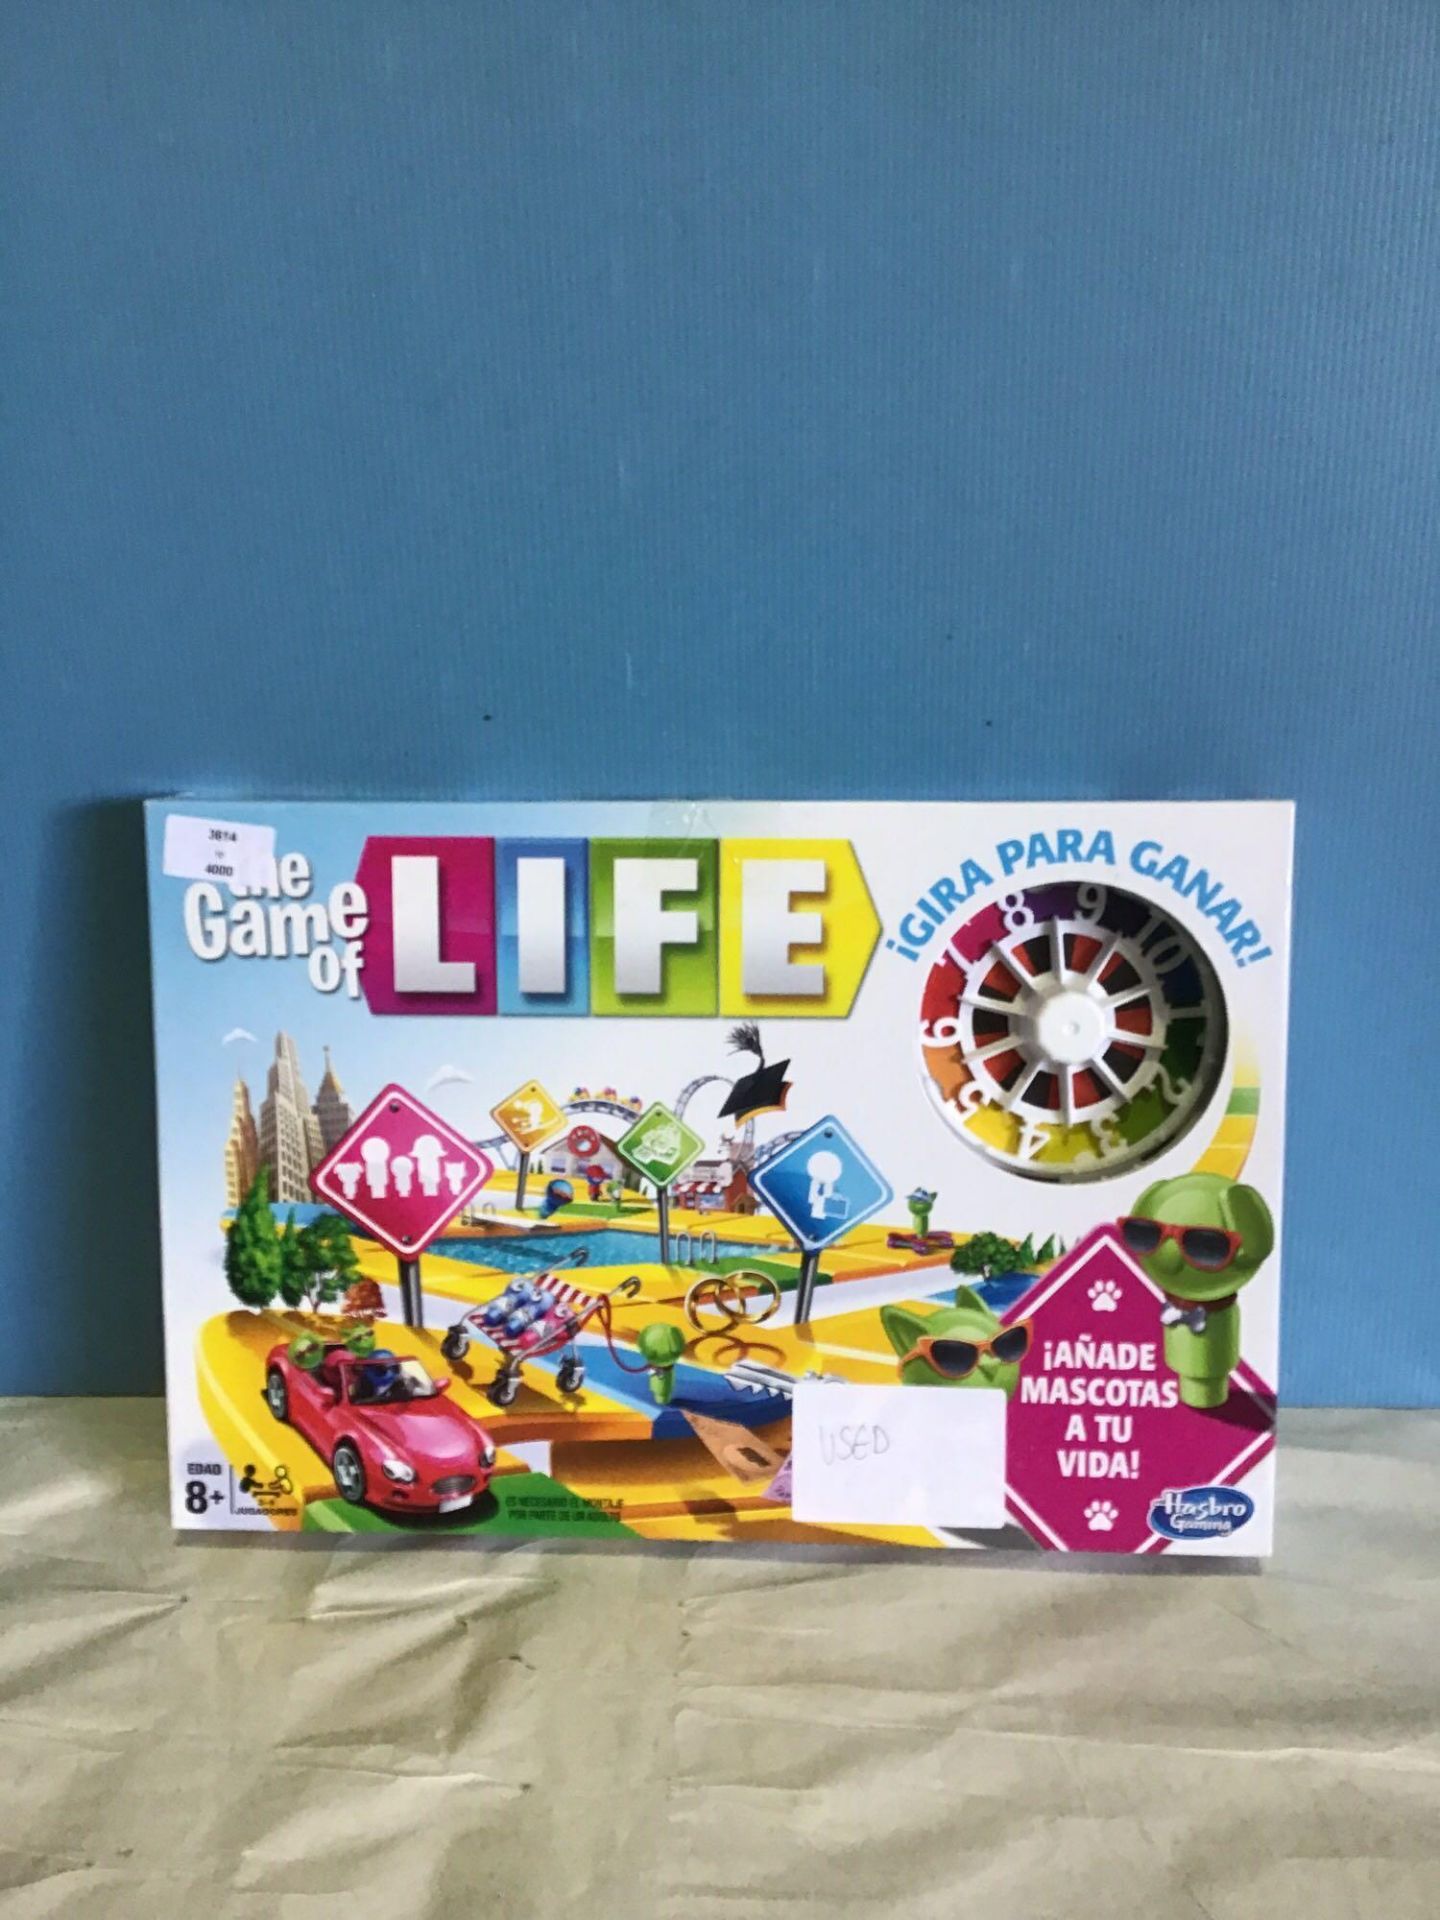 Hasbro Gaming – Game Of Life, Multicoloured (e4304190), Spanish version £33.41 RRP - Image 2 of 5